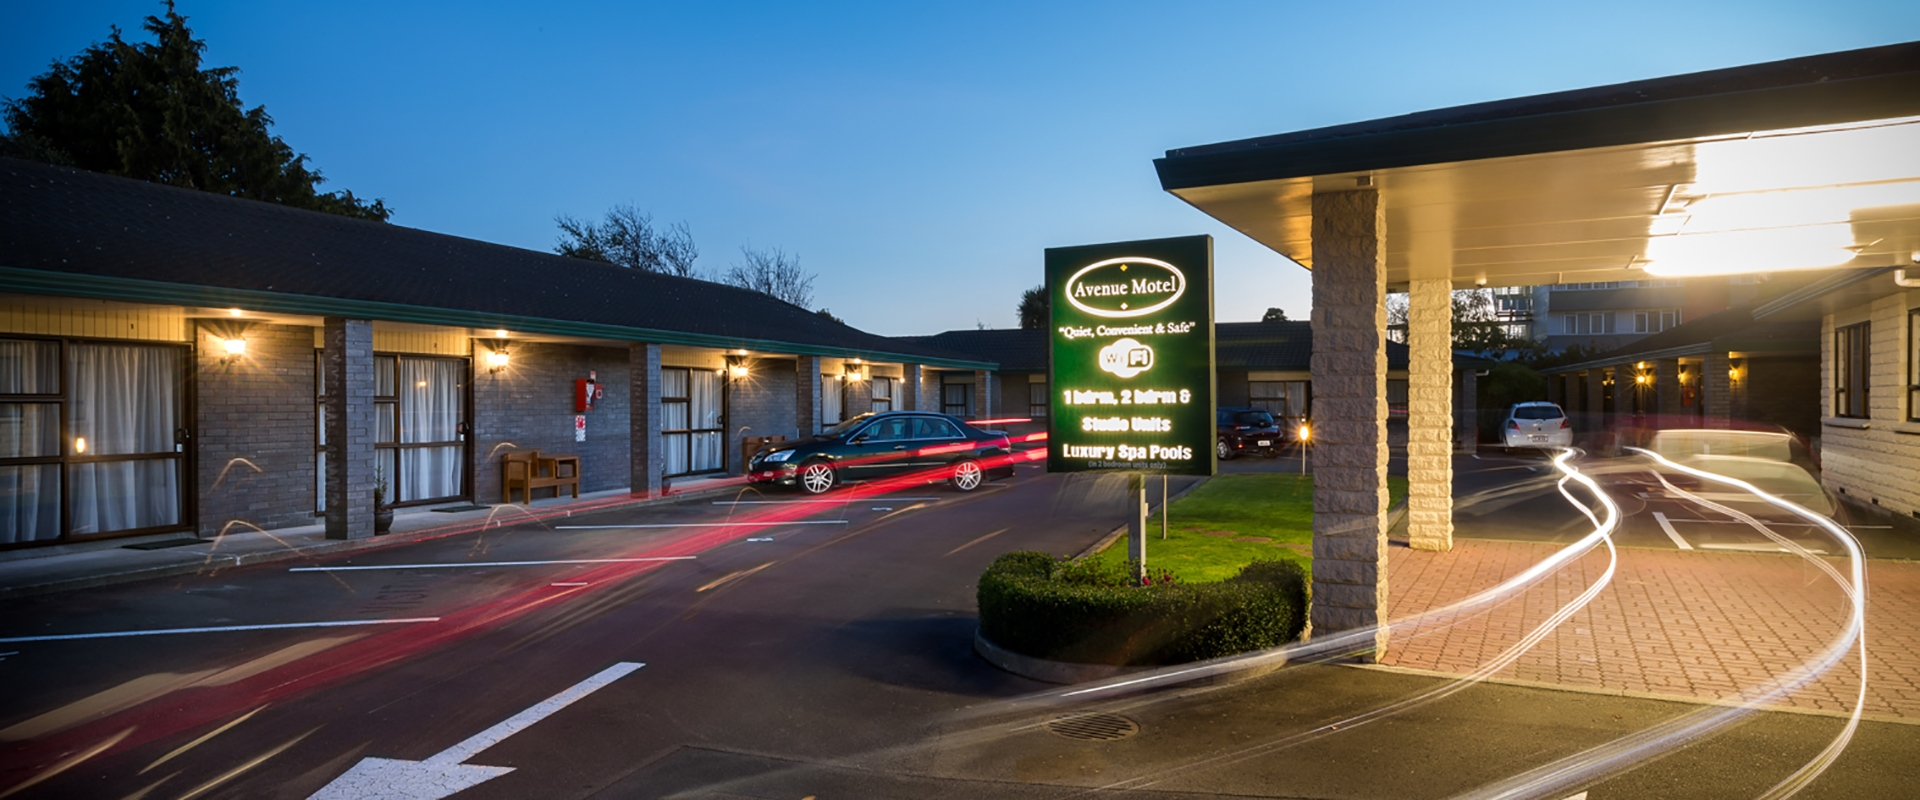 places to stay in palmerston north